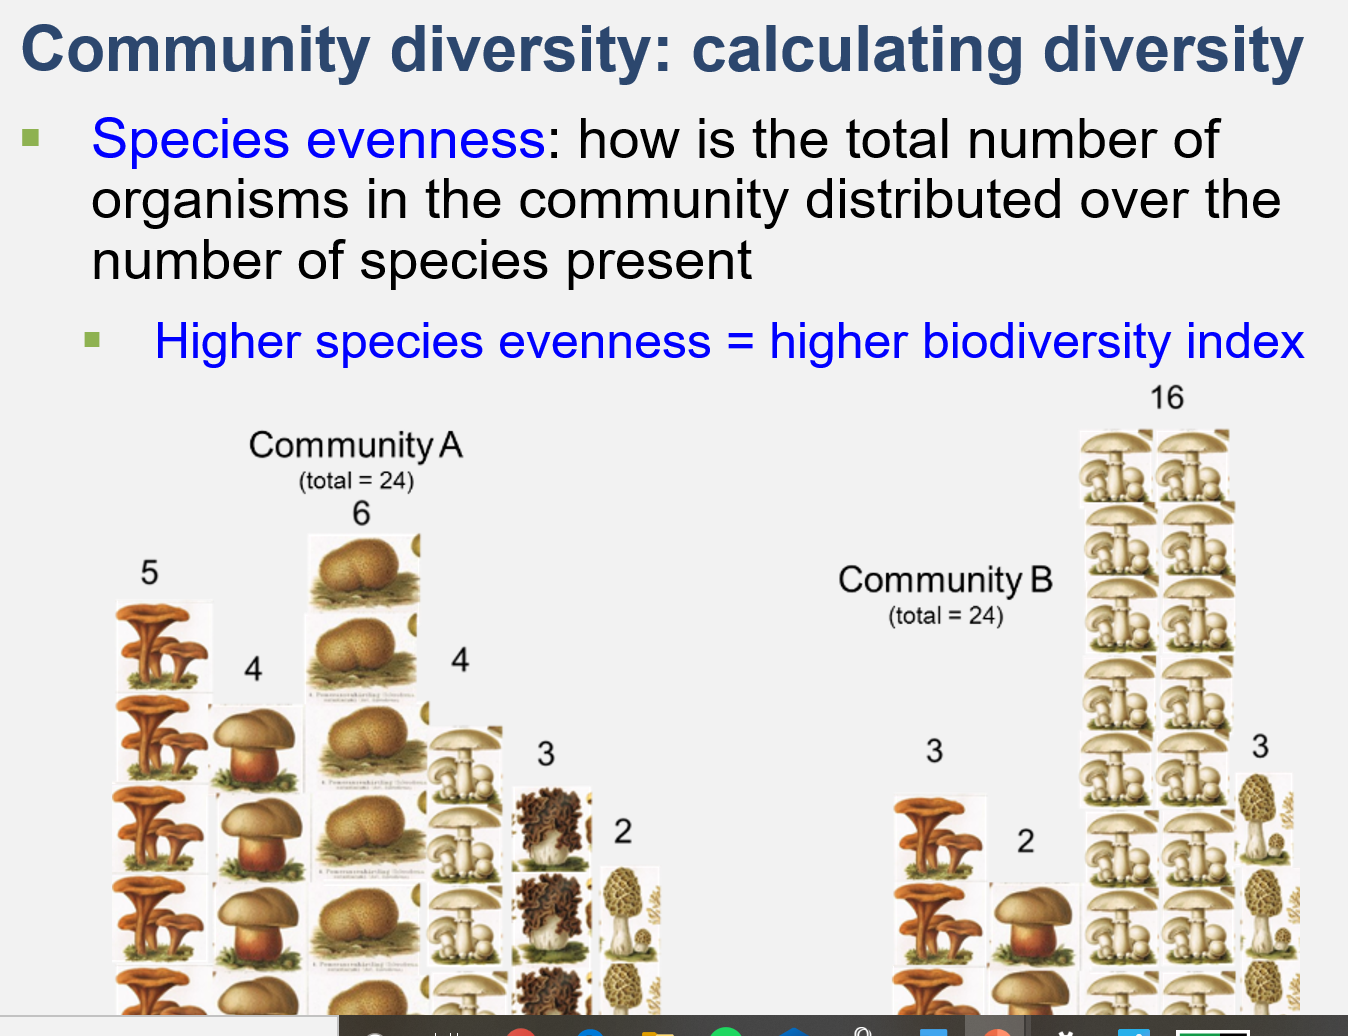 Community diversity: calculating diversity
• Species evenness: how is the total number of
organisms in the community distributed over the
number of species present
Higher species evenness = higher biodiversity index
16
Community A
(total = 24)
6
5
Community B
(total = 24)
4
3
2
3.
Galatatatalalala
401010
